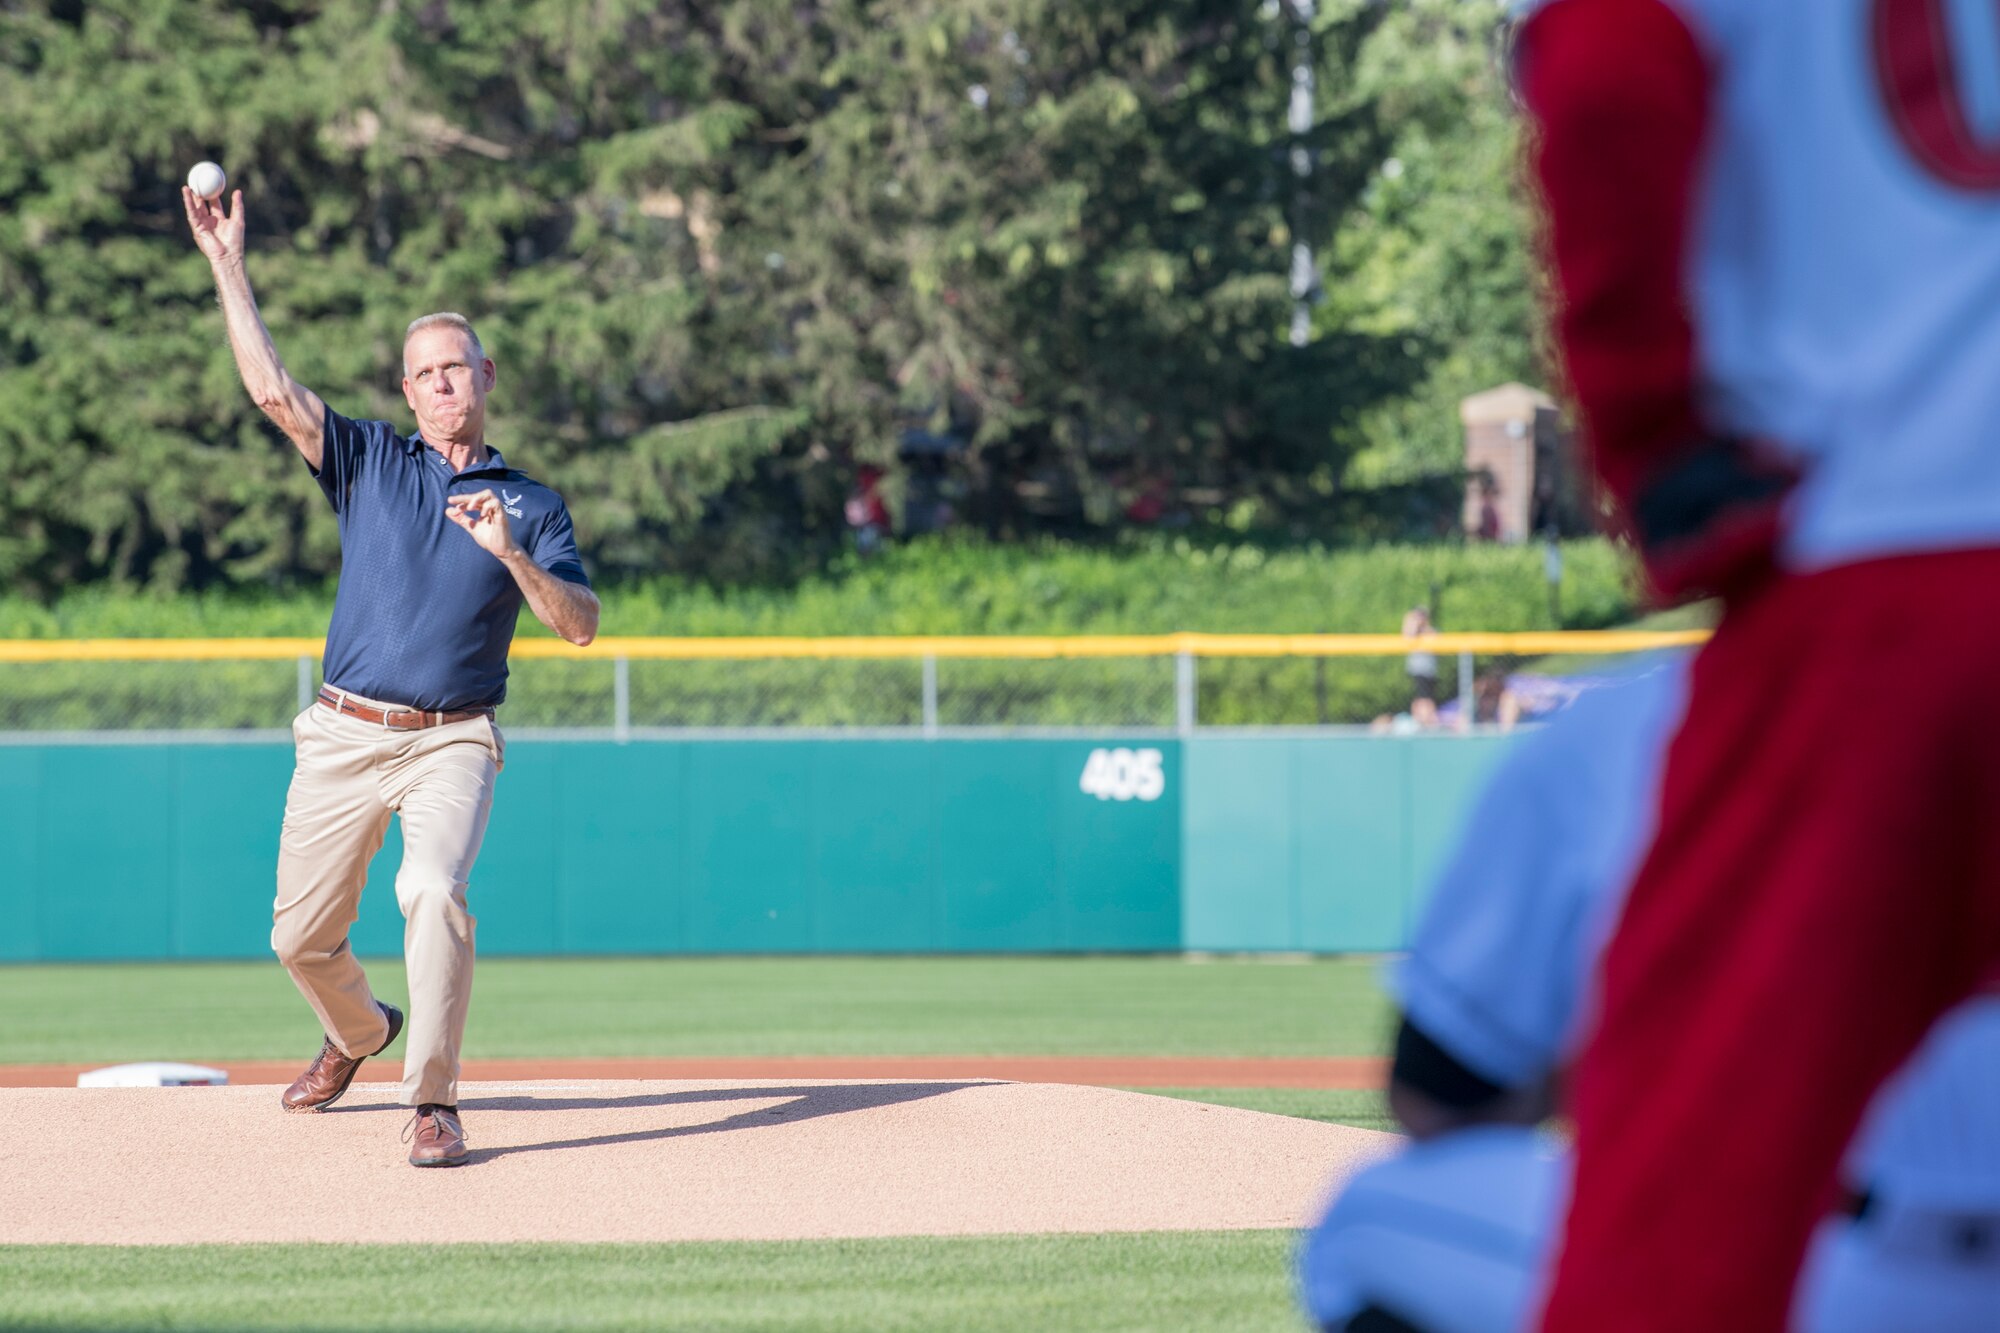 Col. Larry Shaw, 434th Air Refueling Wing commander, winds up to deliver the first pitch June 25, 2019 at an Indianapolis Indians home game. Shaw joined Air Force Reserve recruiters to make a pitch to future Airmen to join the 434th ARW. (U.S. Air Force photo/Benjamin Mota)